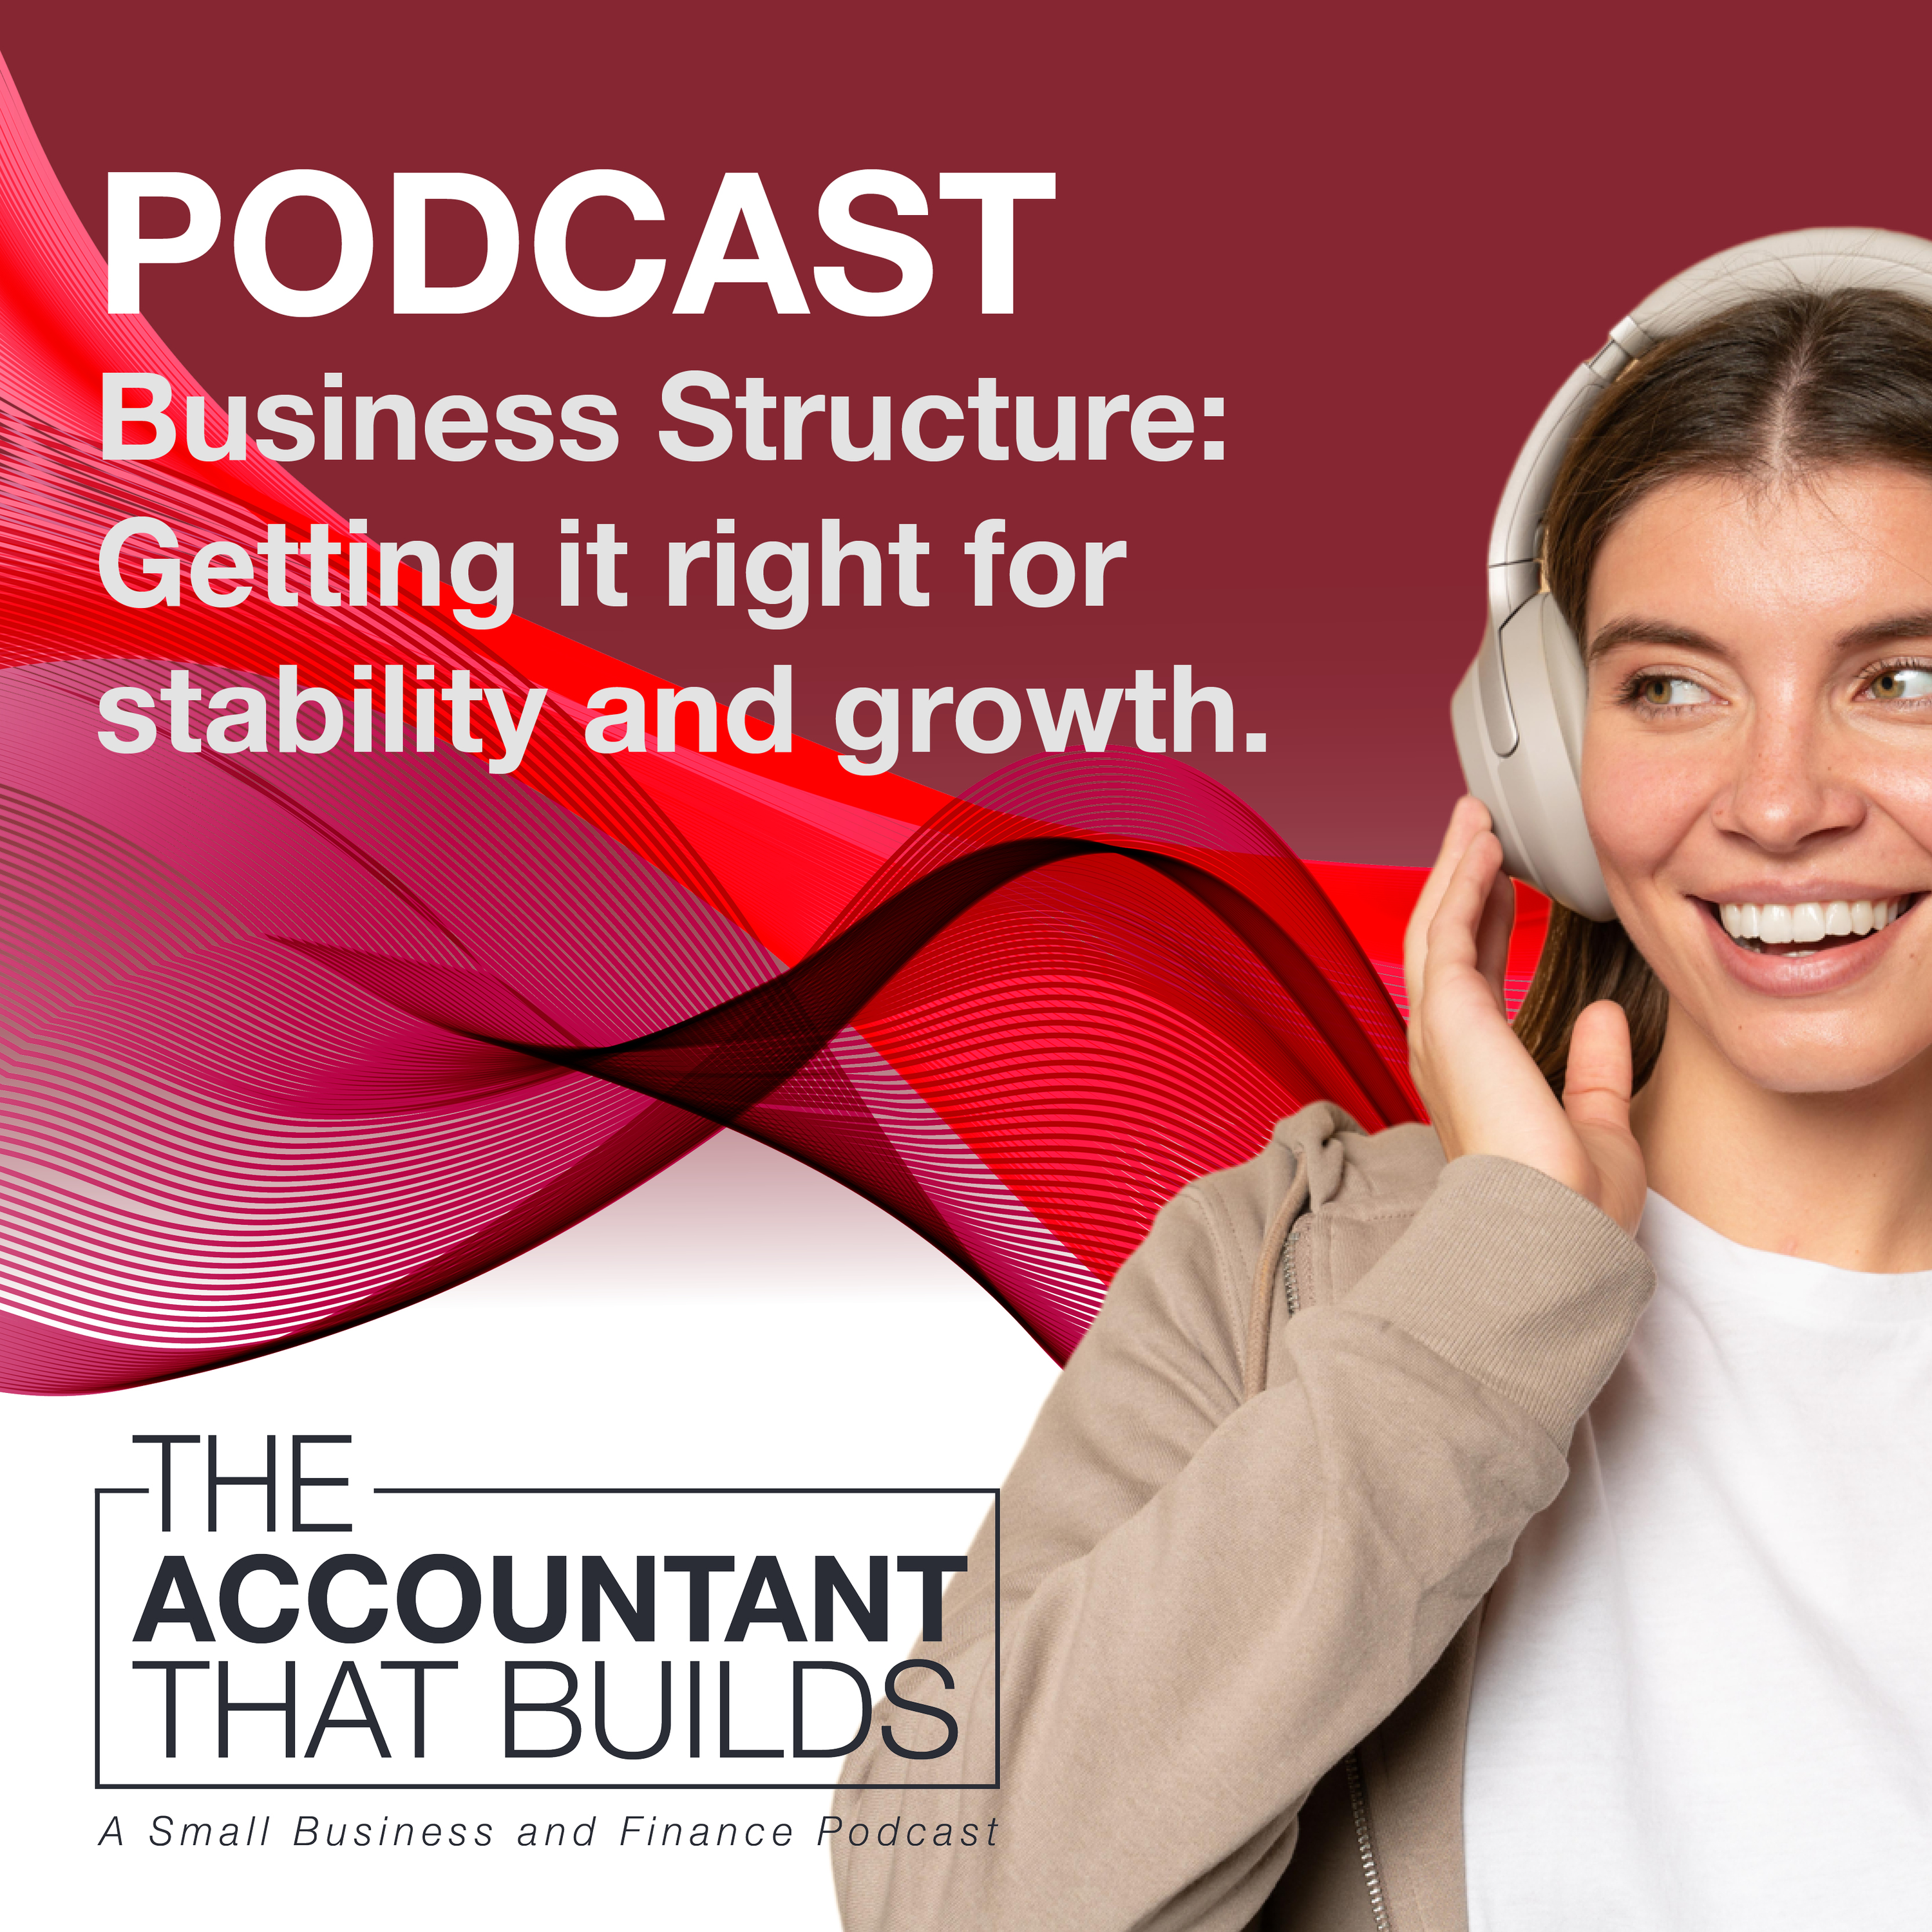 Business Structure: Getting it right for stability and growth